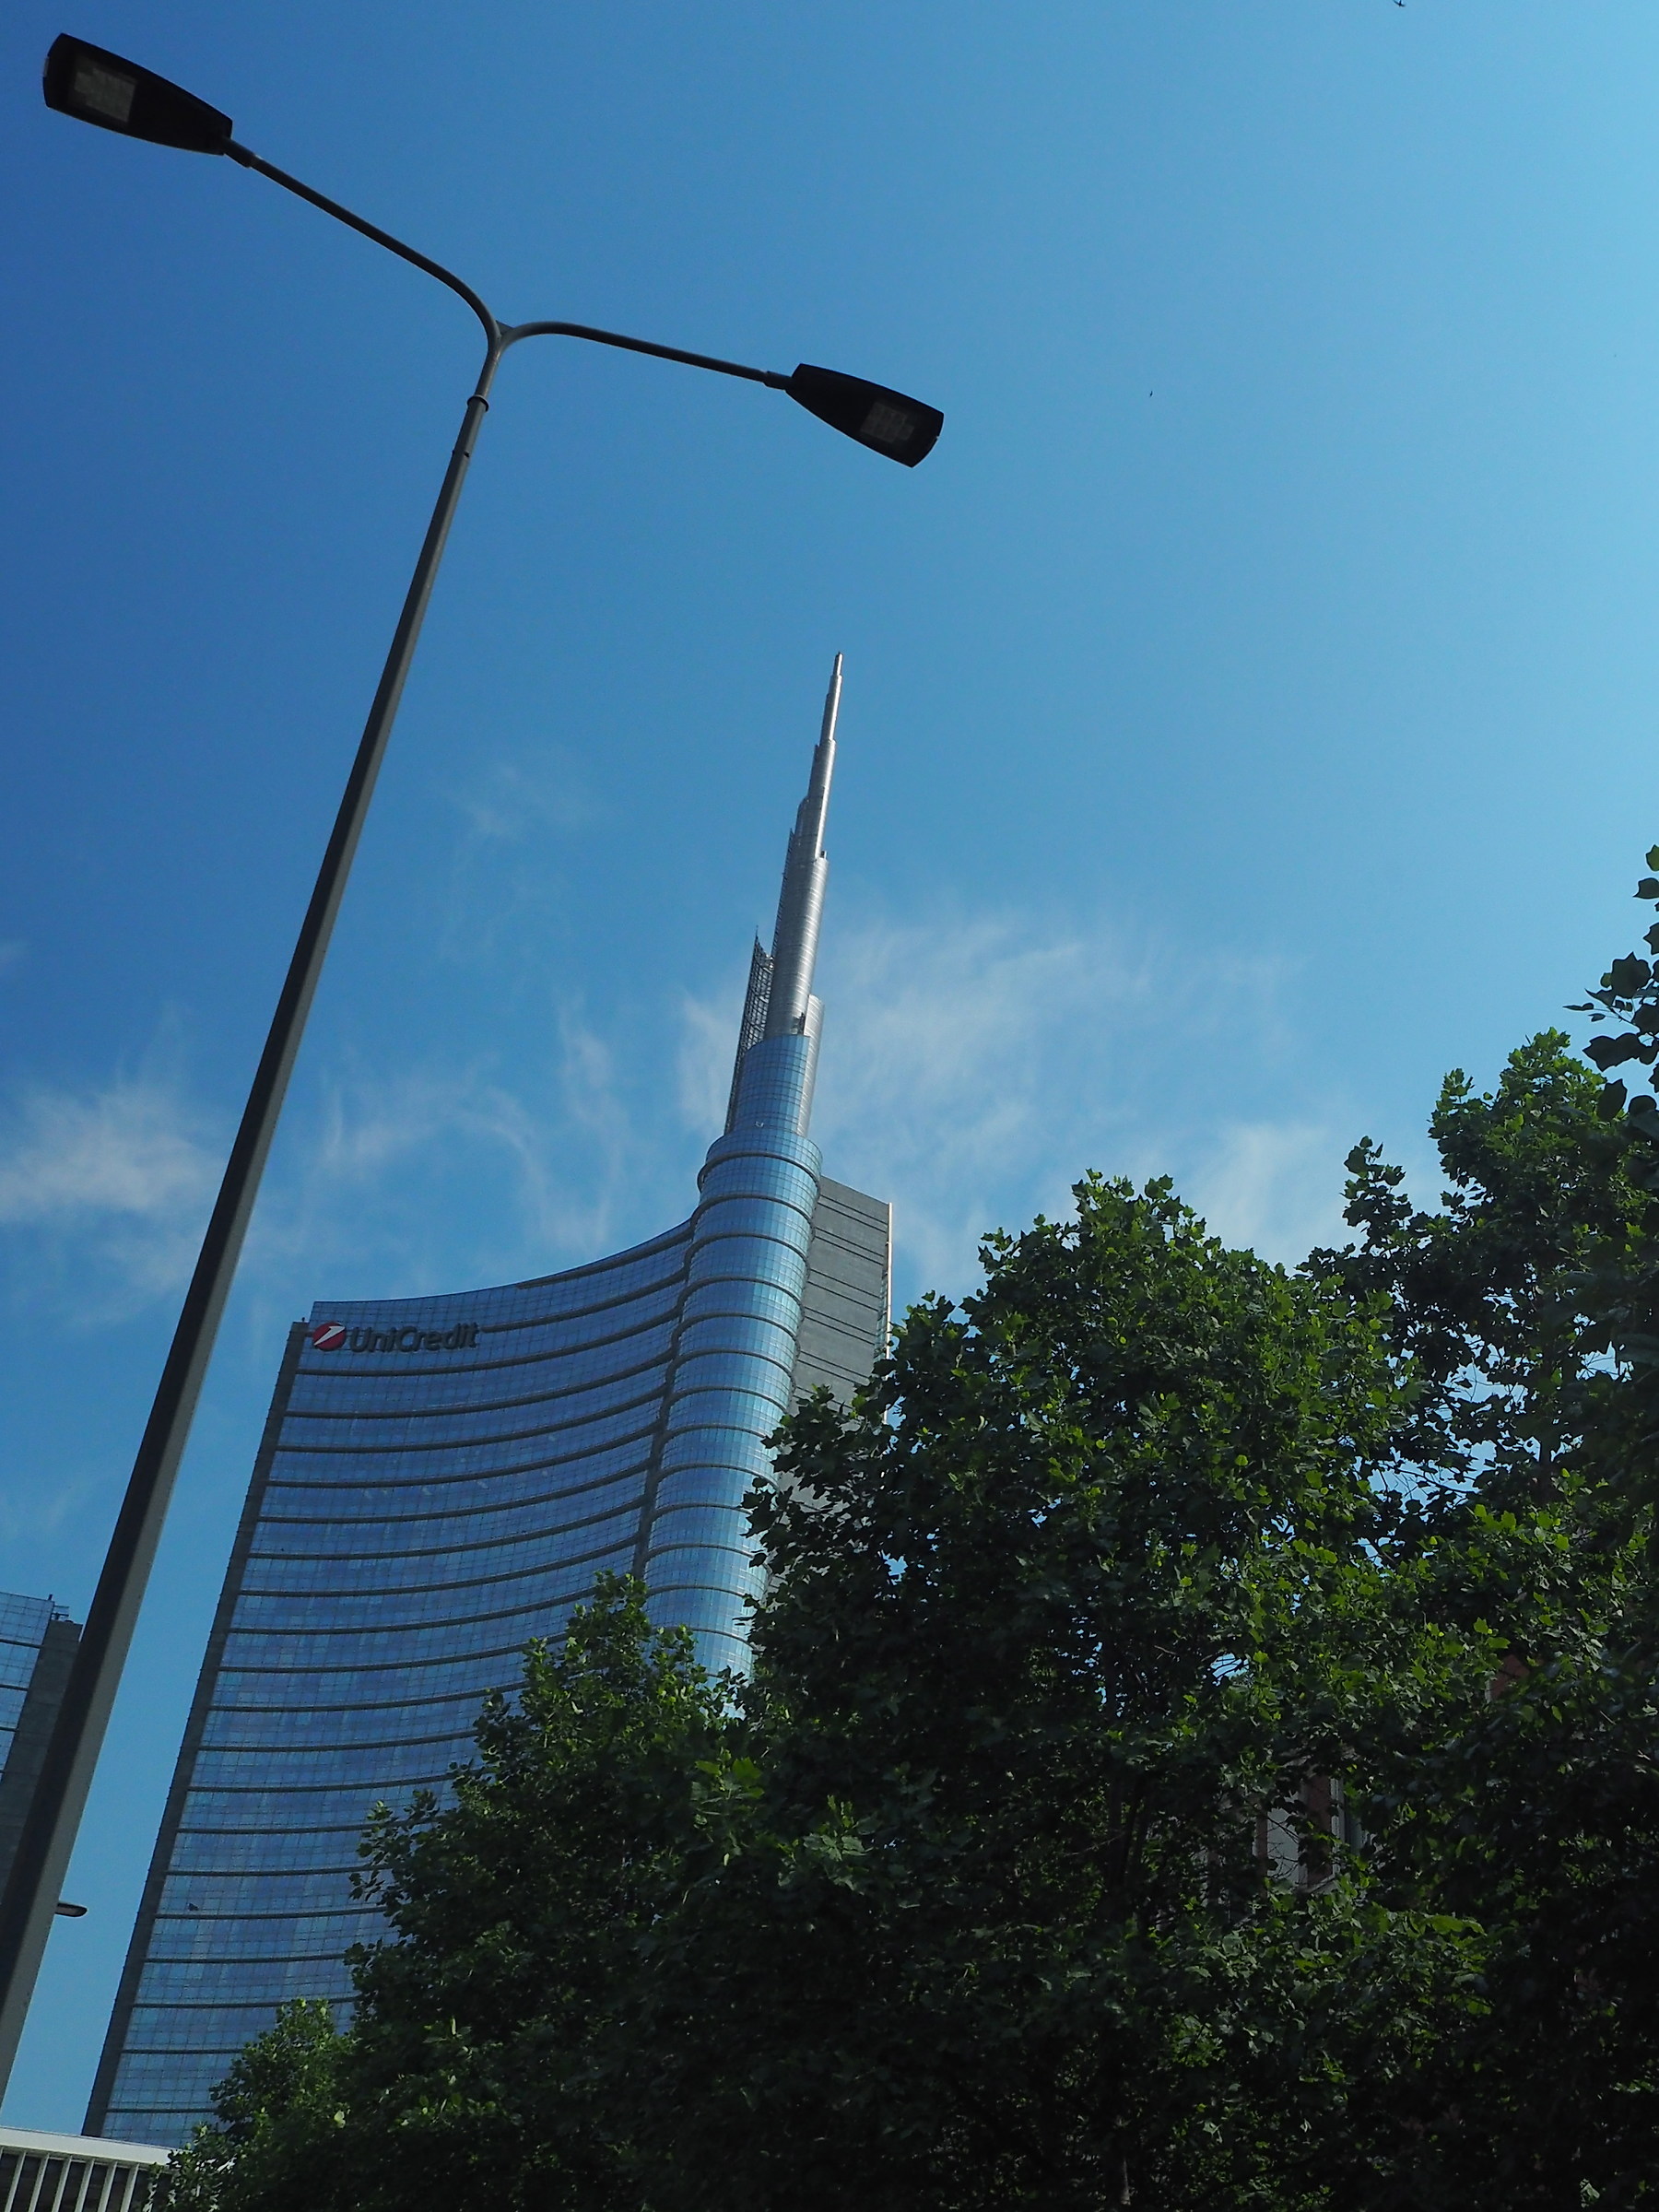 Looking at the sky in Milan...